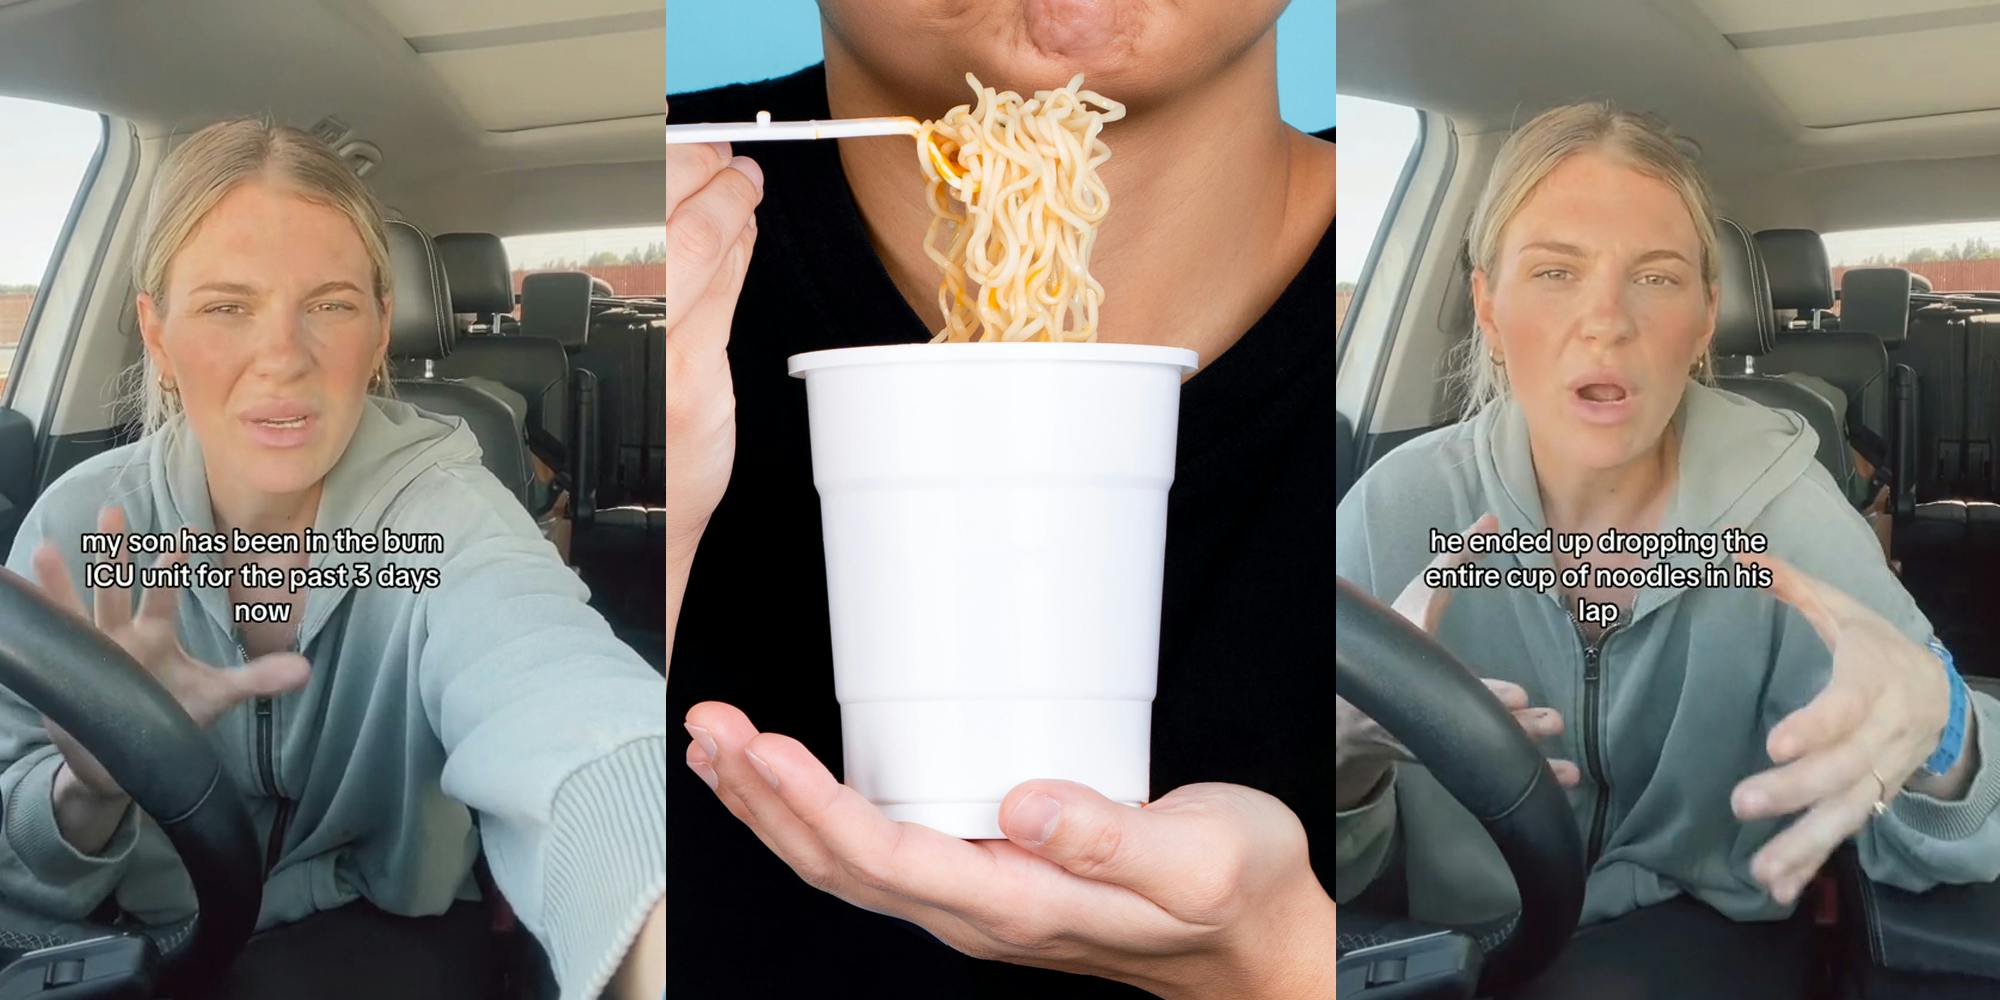 woman speaking in car with caption "my son has been in the burn ICU unit for the past 3 days now" (l) boy eating cup of noodles in front of blue background (c) woman speaking in car with caption "he ended dropping the entire cup of noodles in his lap" (r)